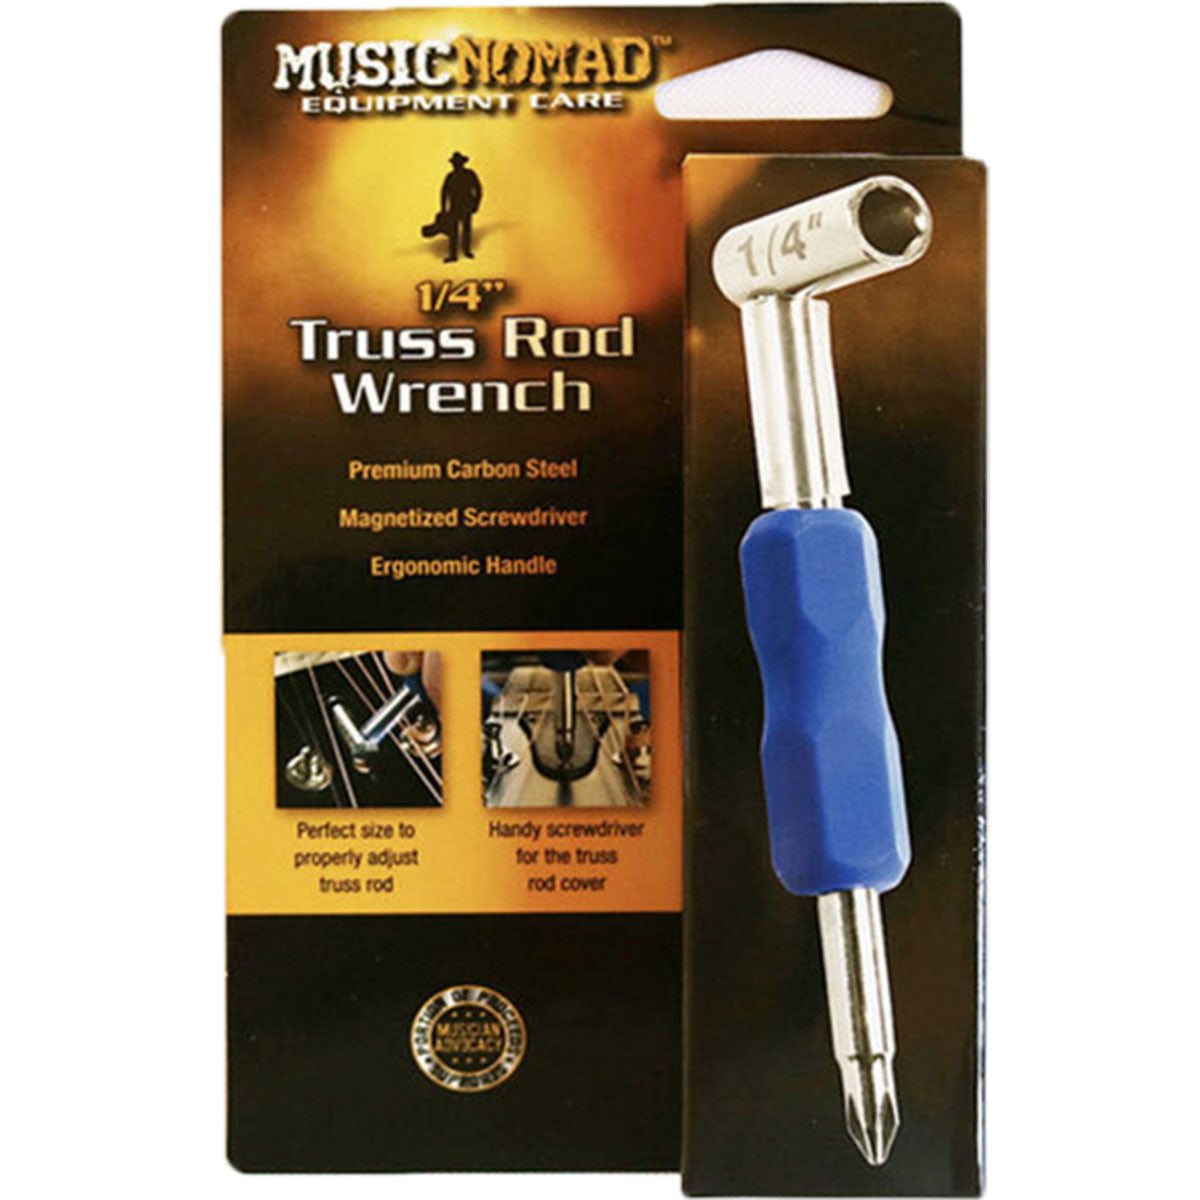 Music Nomad MN231 Premium 1/4inch Truss Rod Wrench w/ Magnetized Screwdriver